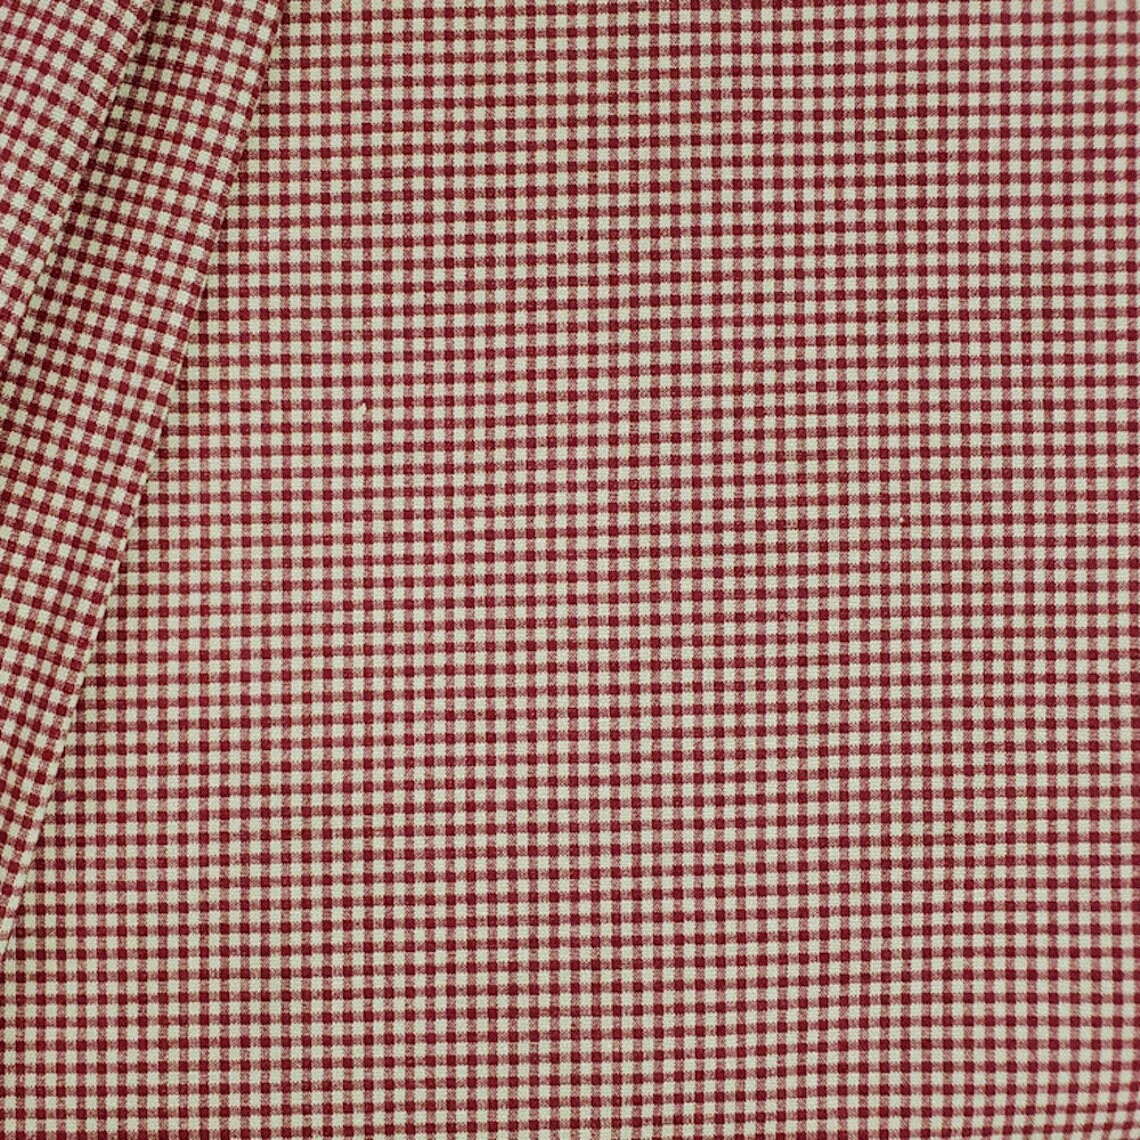 tailored crib skirt in farmhouse red gingham check on beige